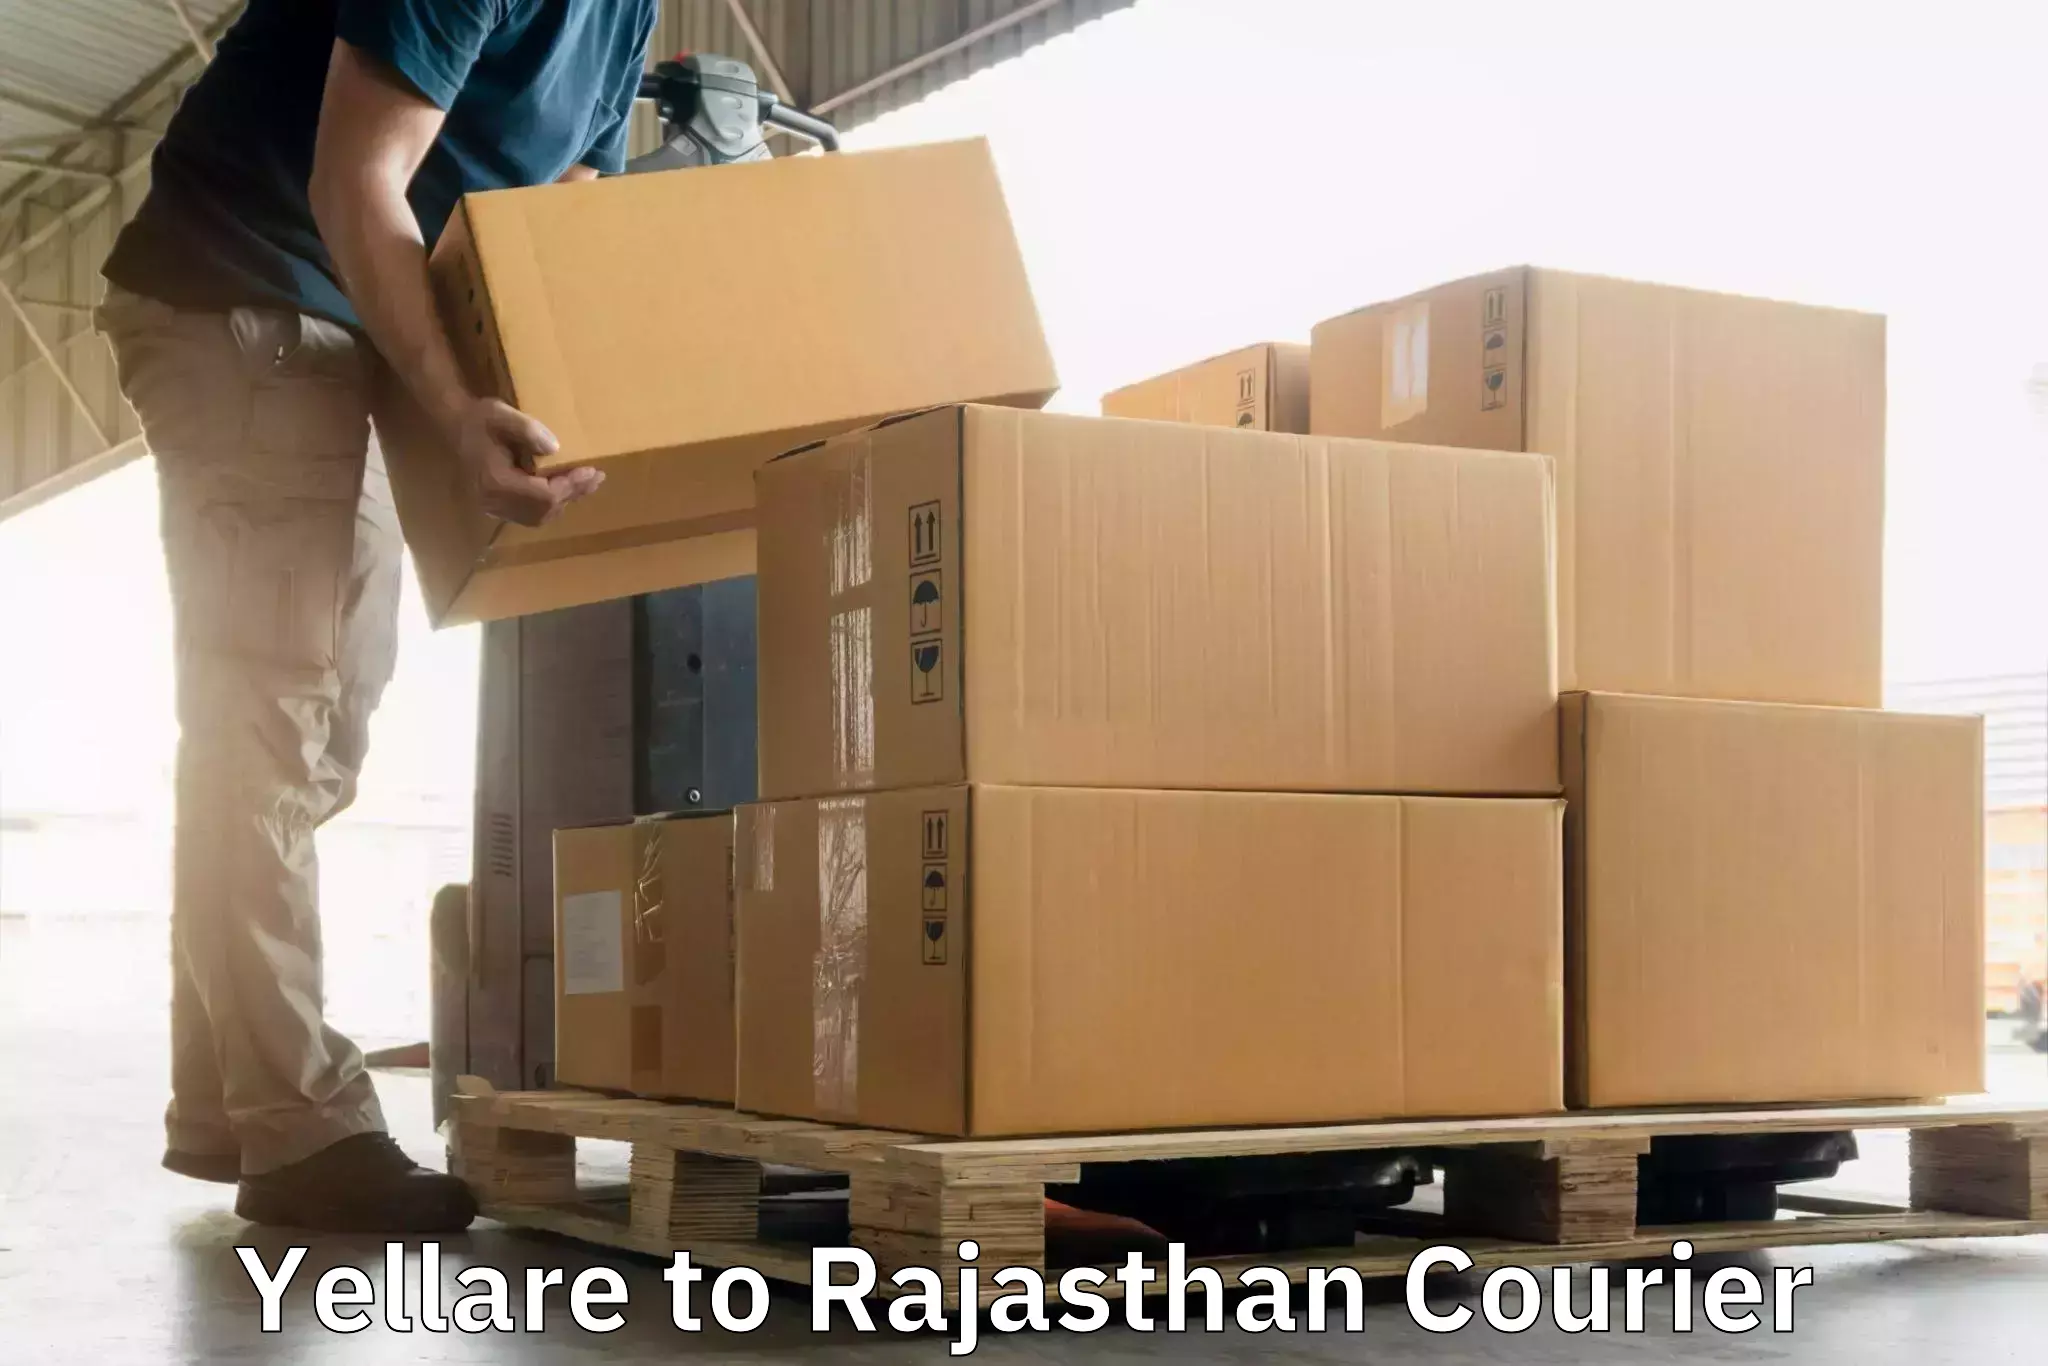 Business delivery service Yellare to Rajasthan